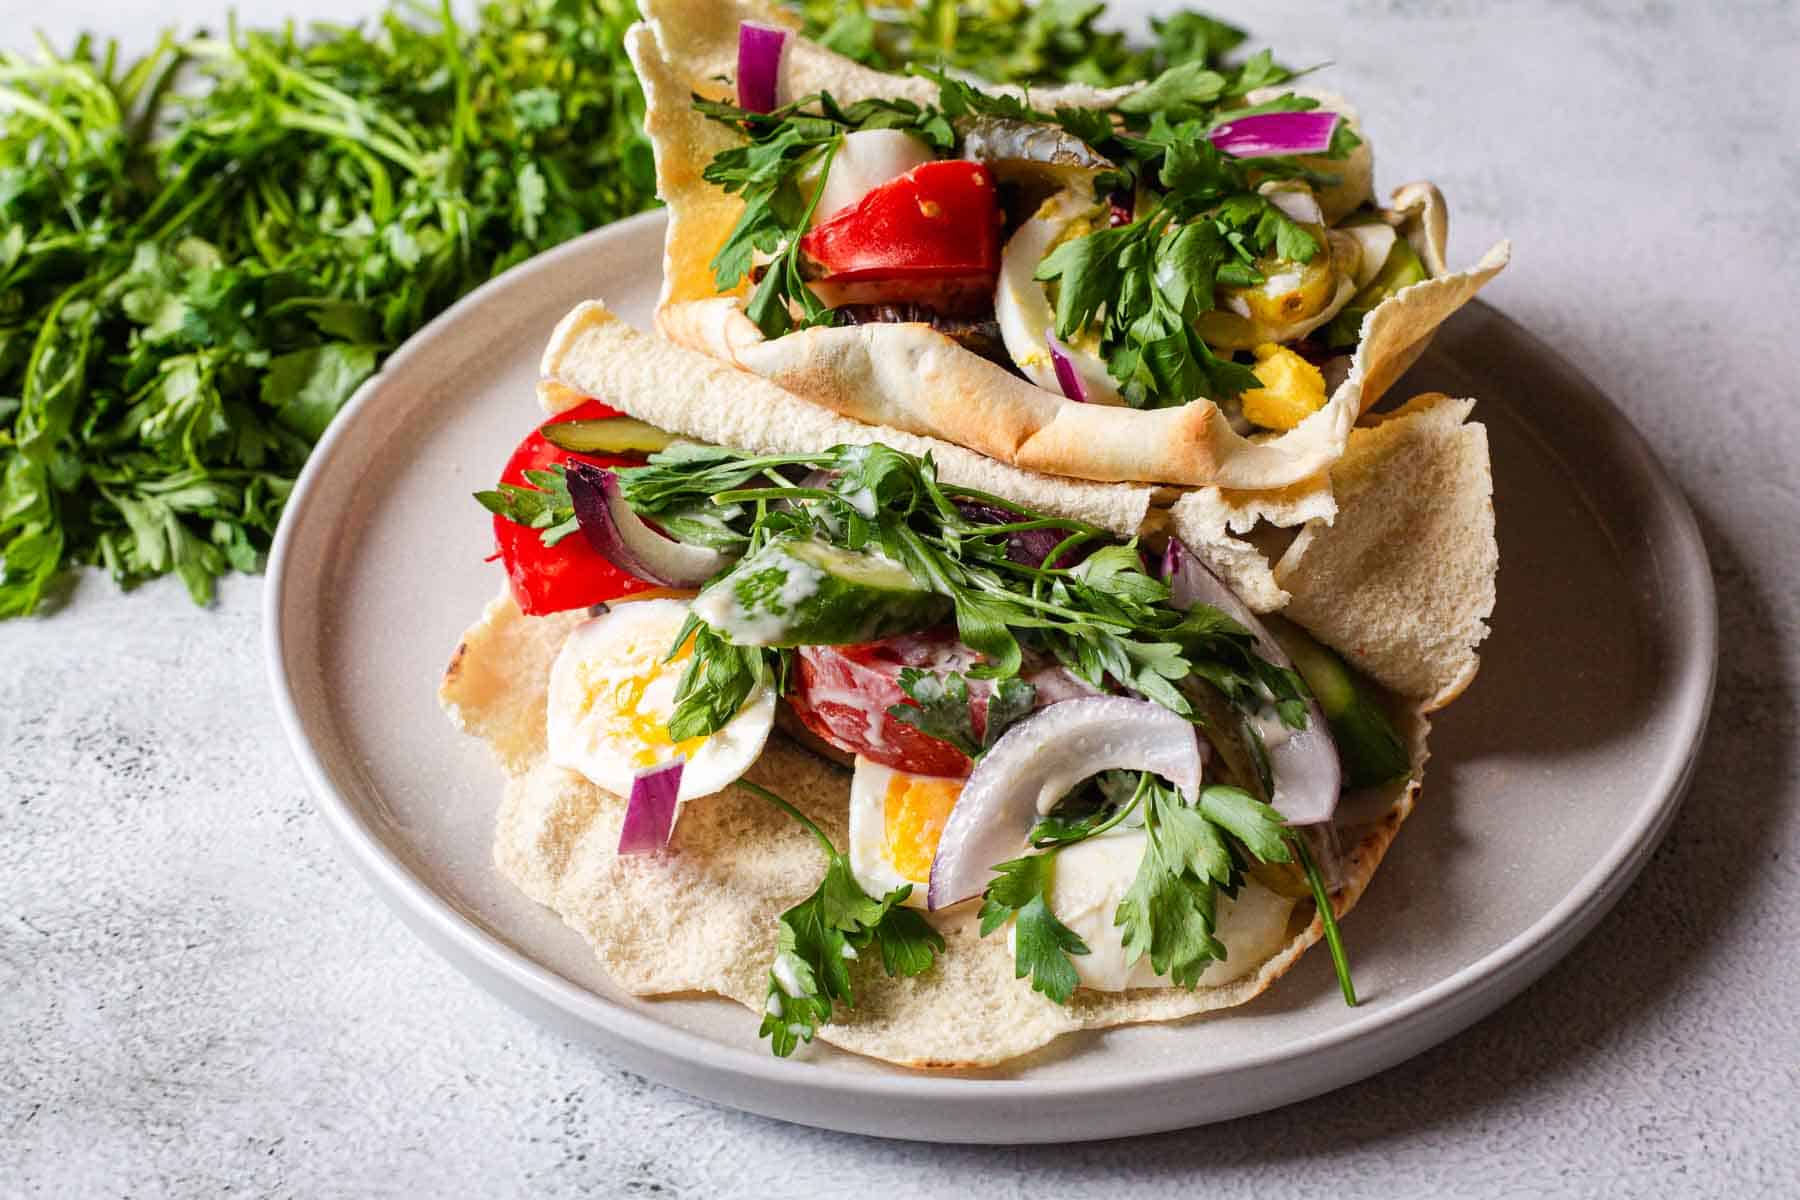 A plate with pitas and vegetables on it.